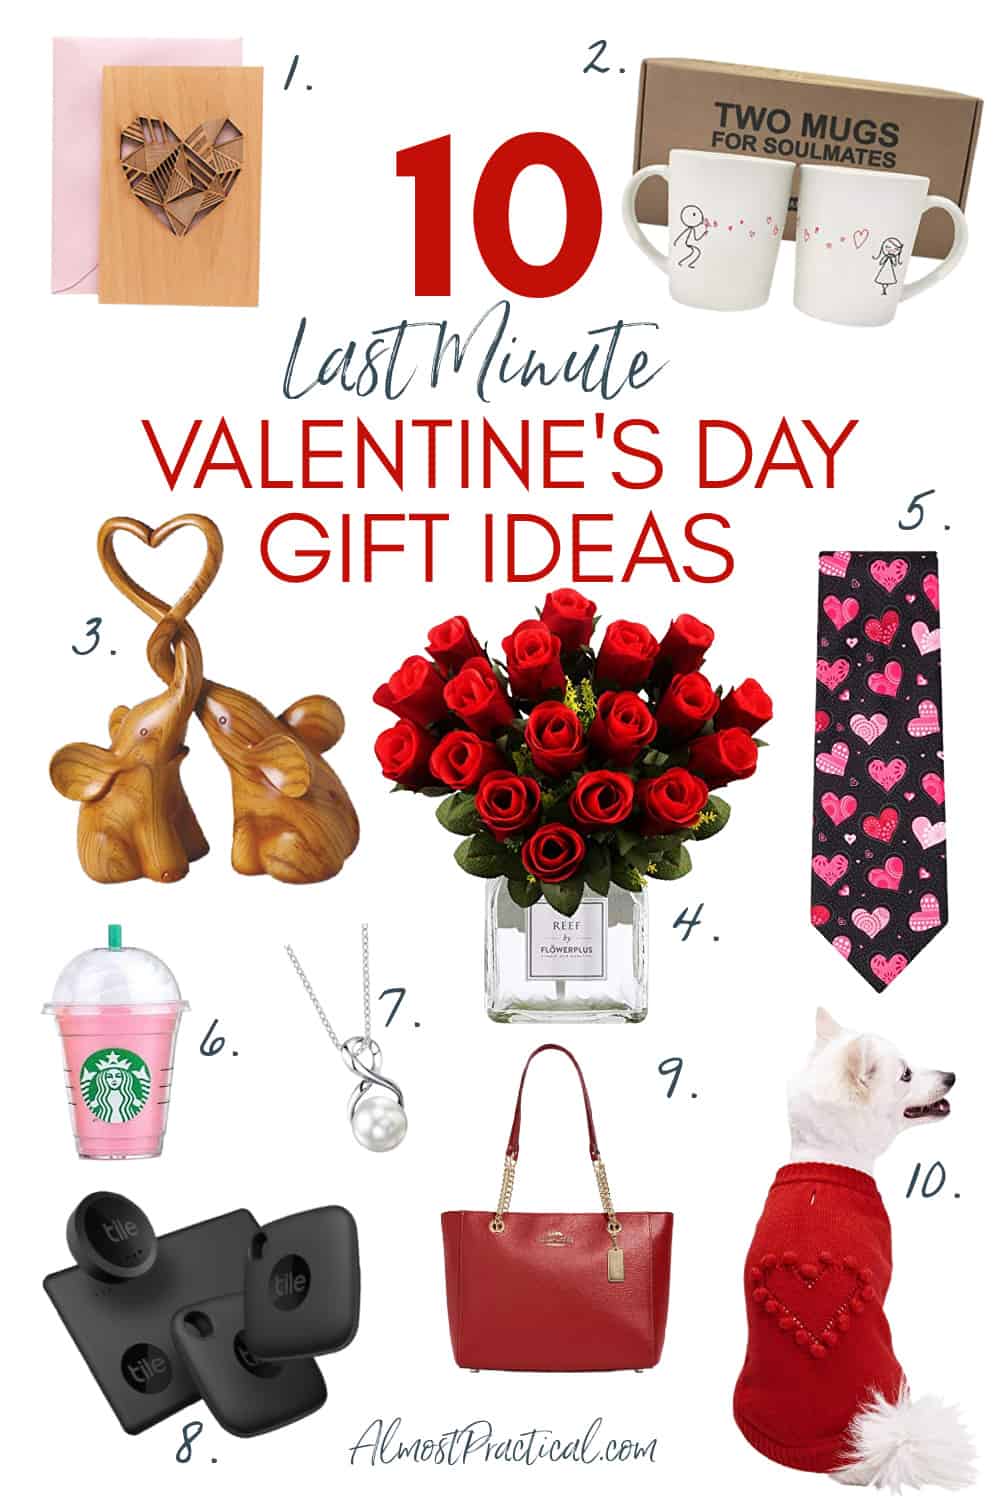 4 Valentine's Day Gift Ideas For The Dessert Lover in Your Life